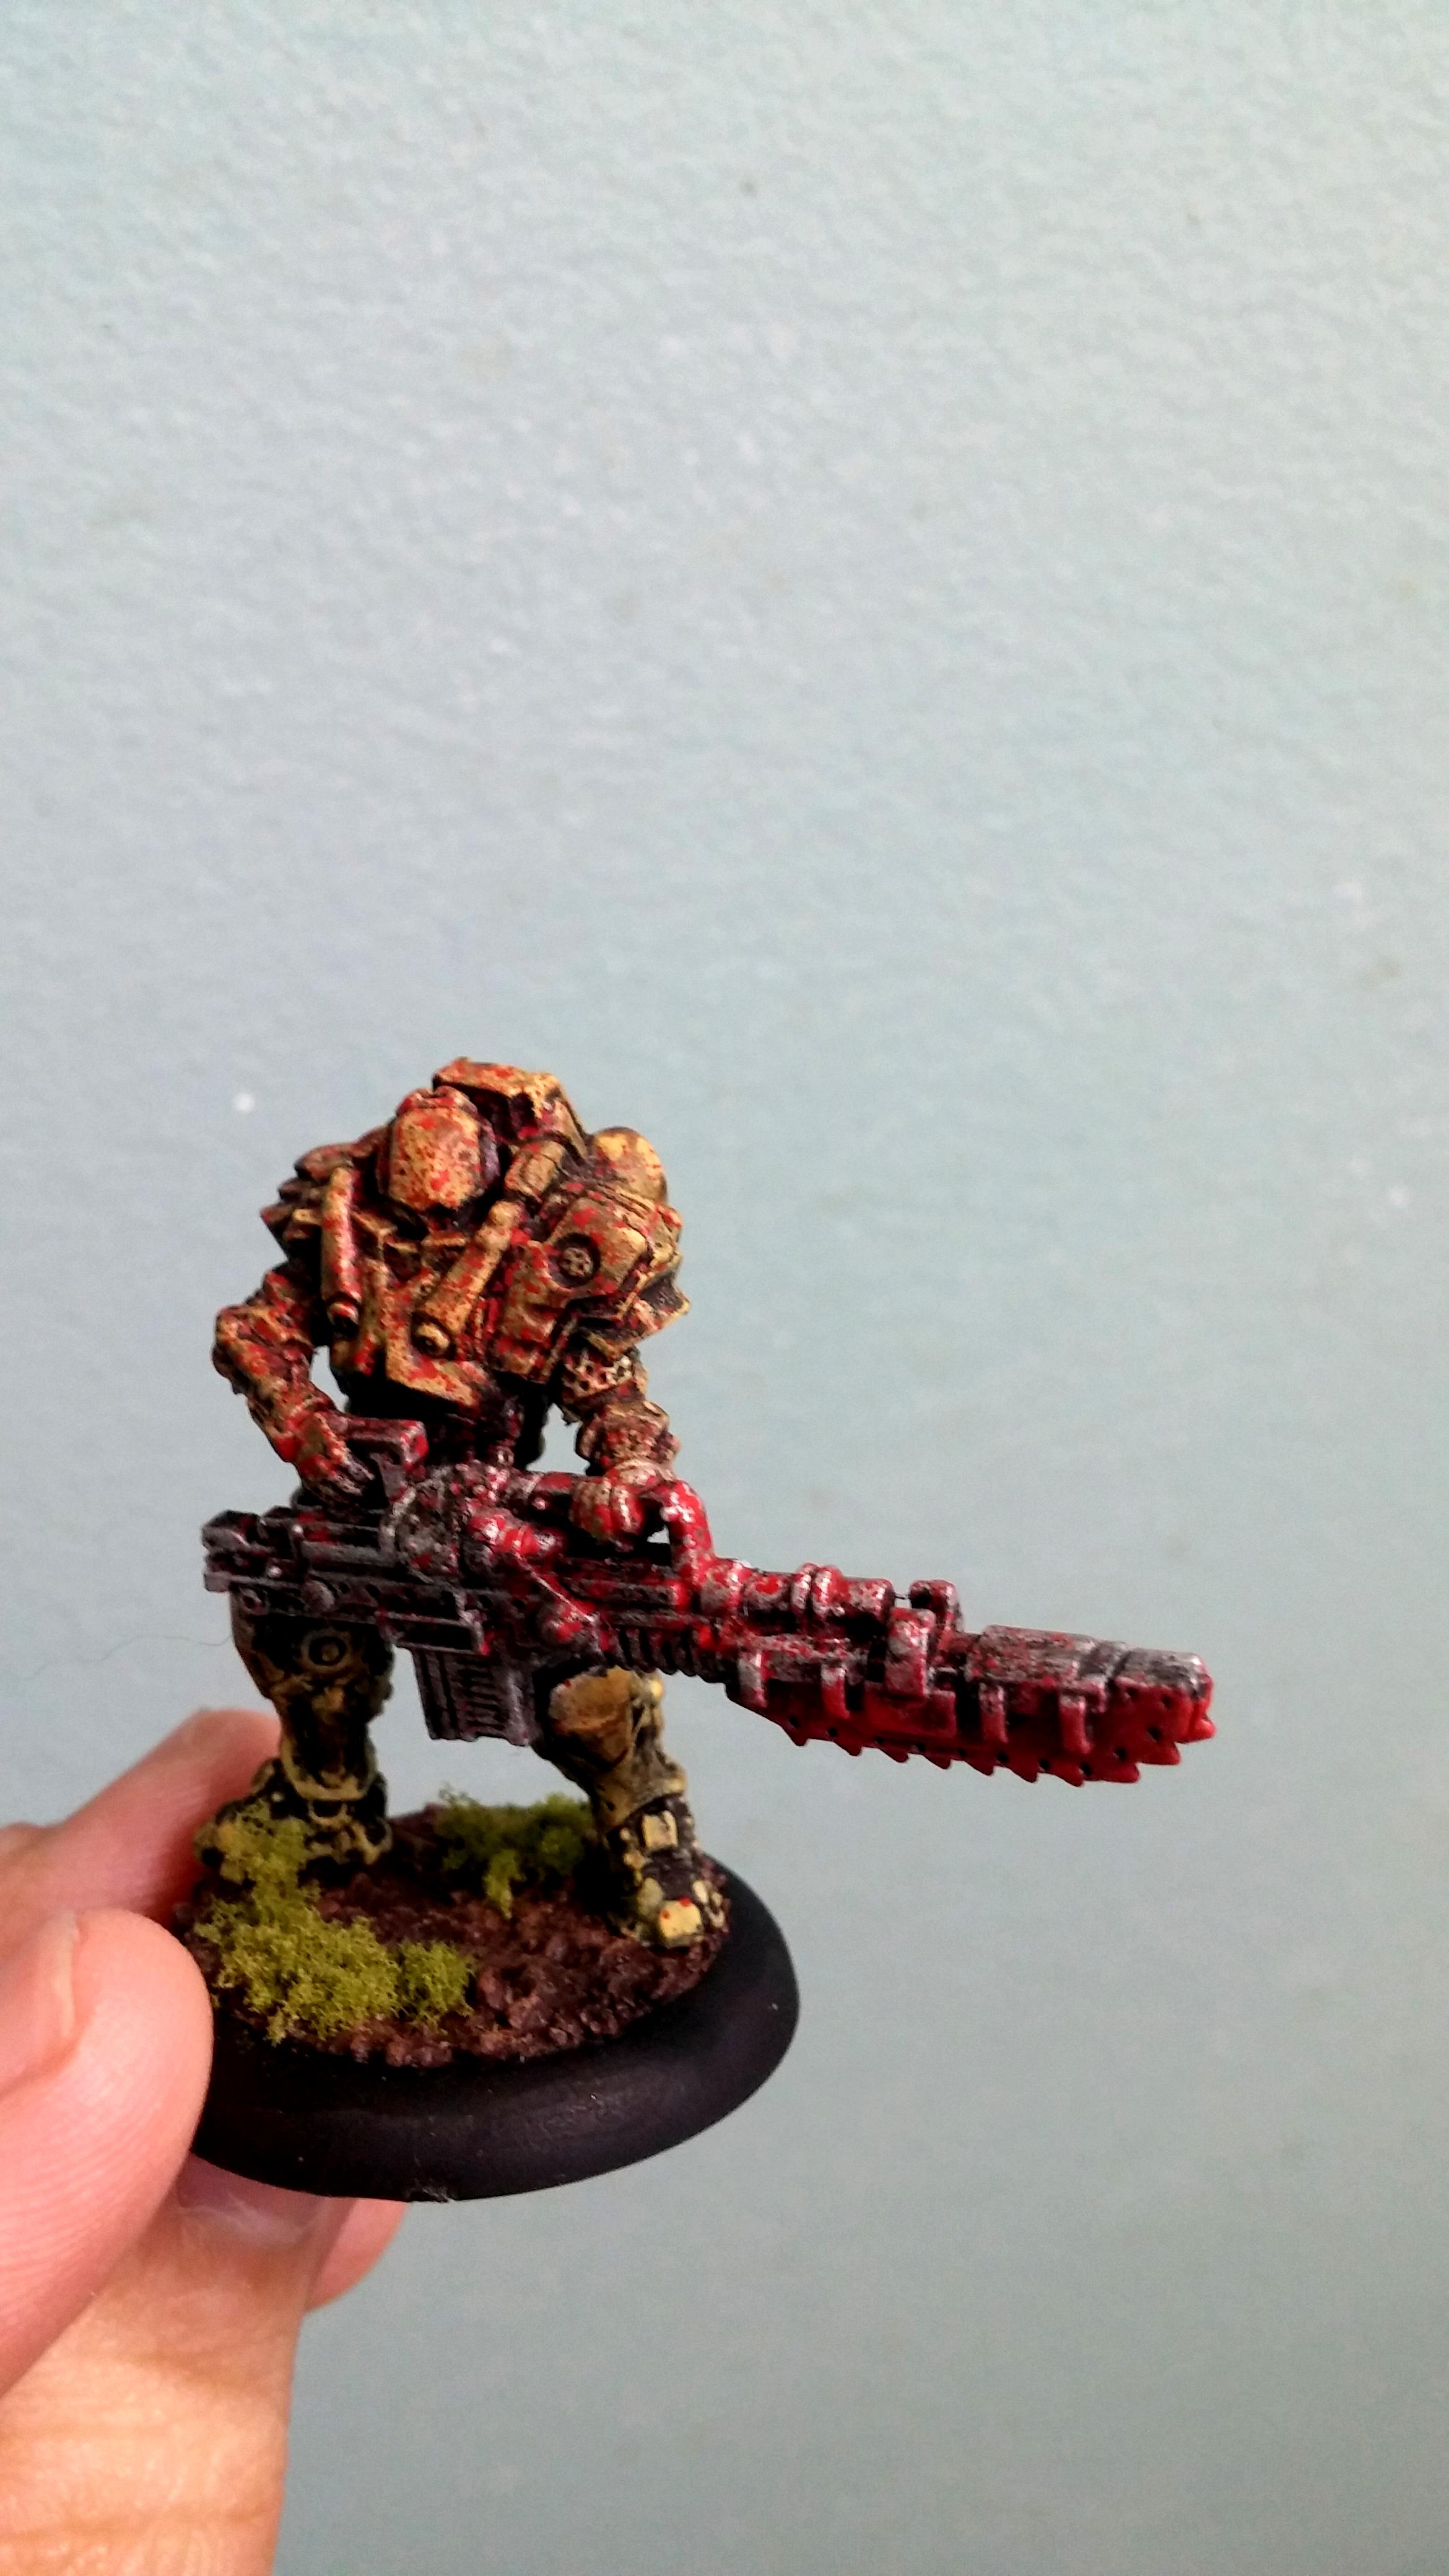 Capitol Heavy Infantry, Spatter